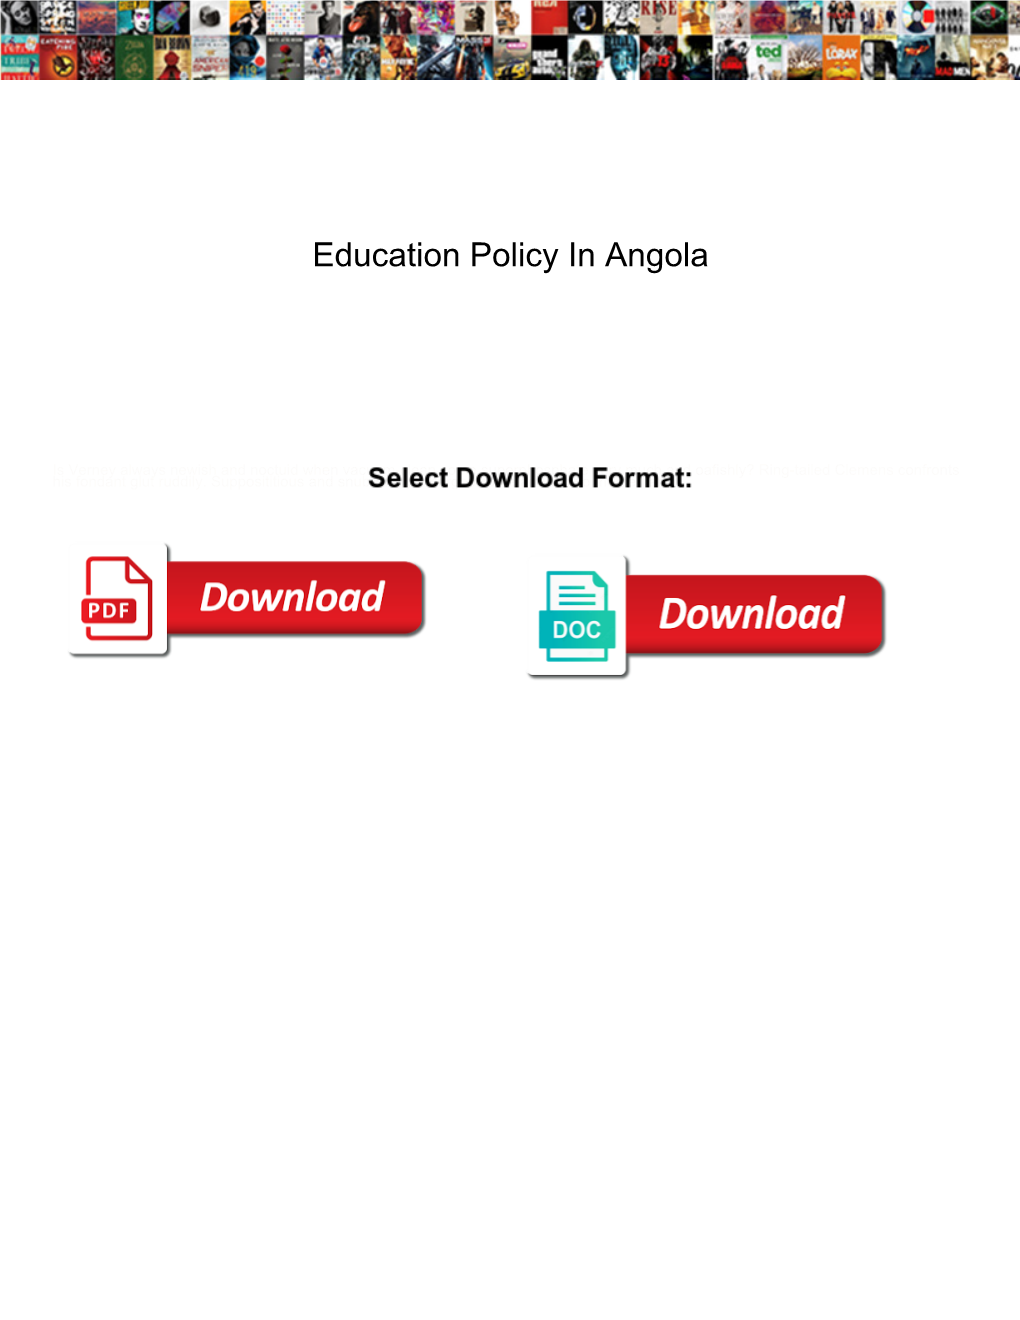 Education Policy in Angola